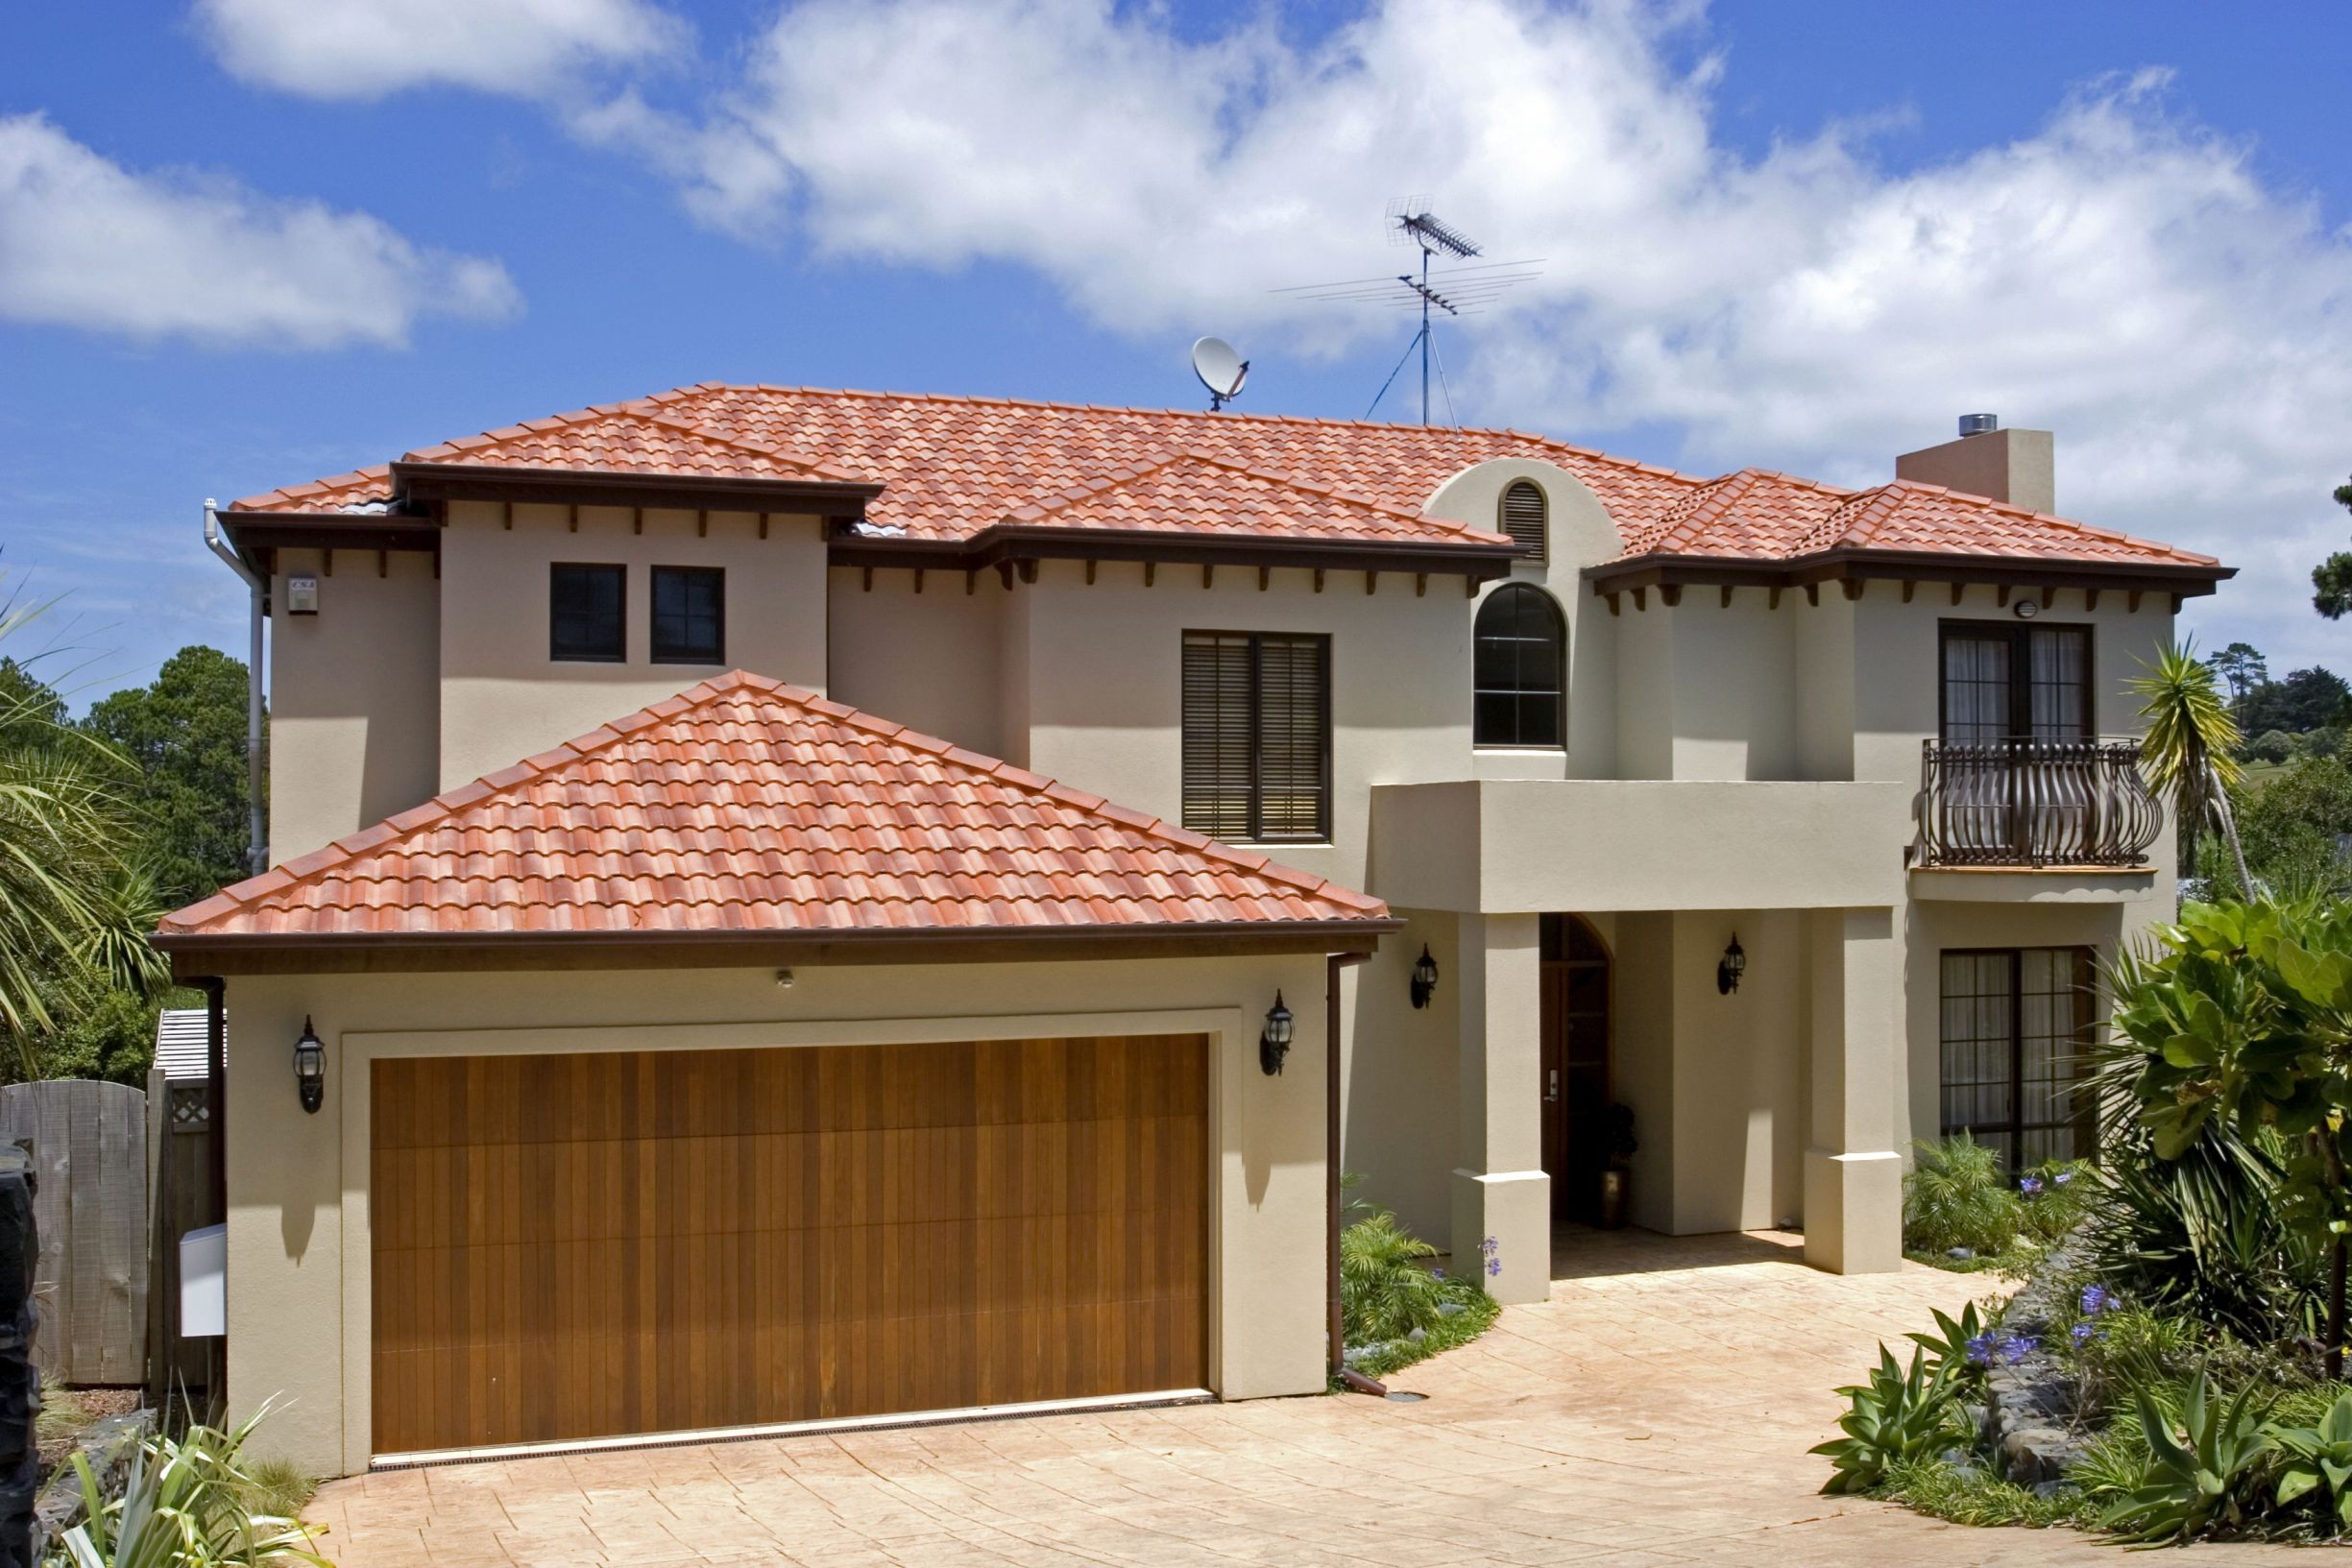 3 Reasons Why You Should Invest in New Garage Doors in Highland Park, IL